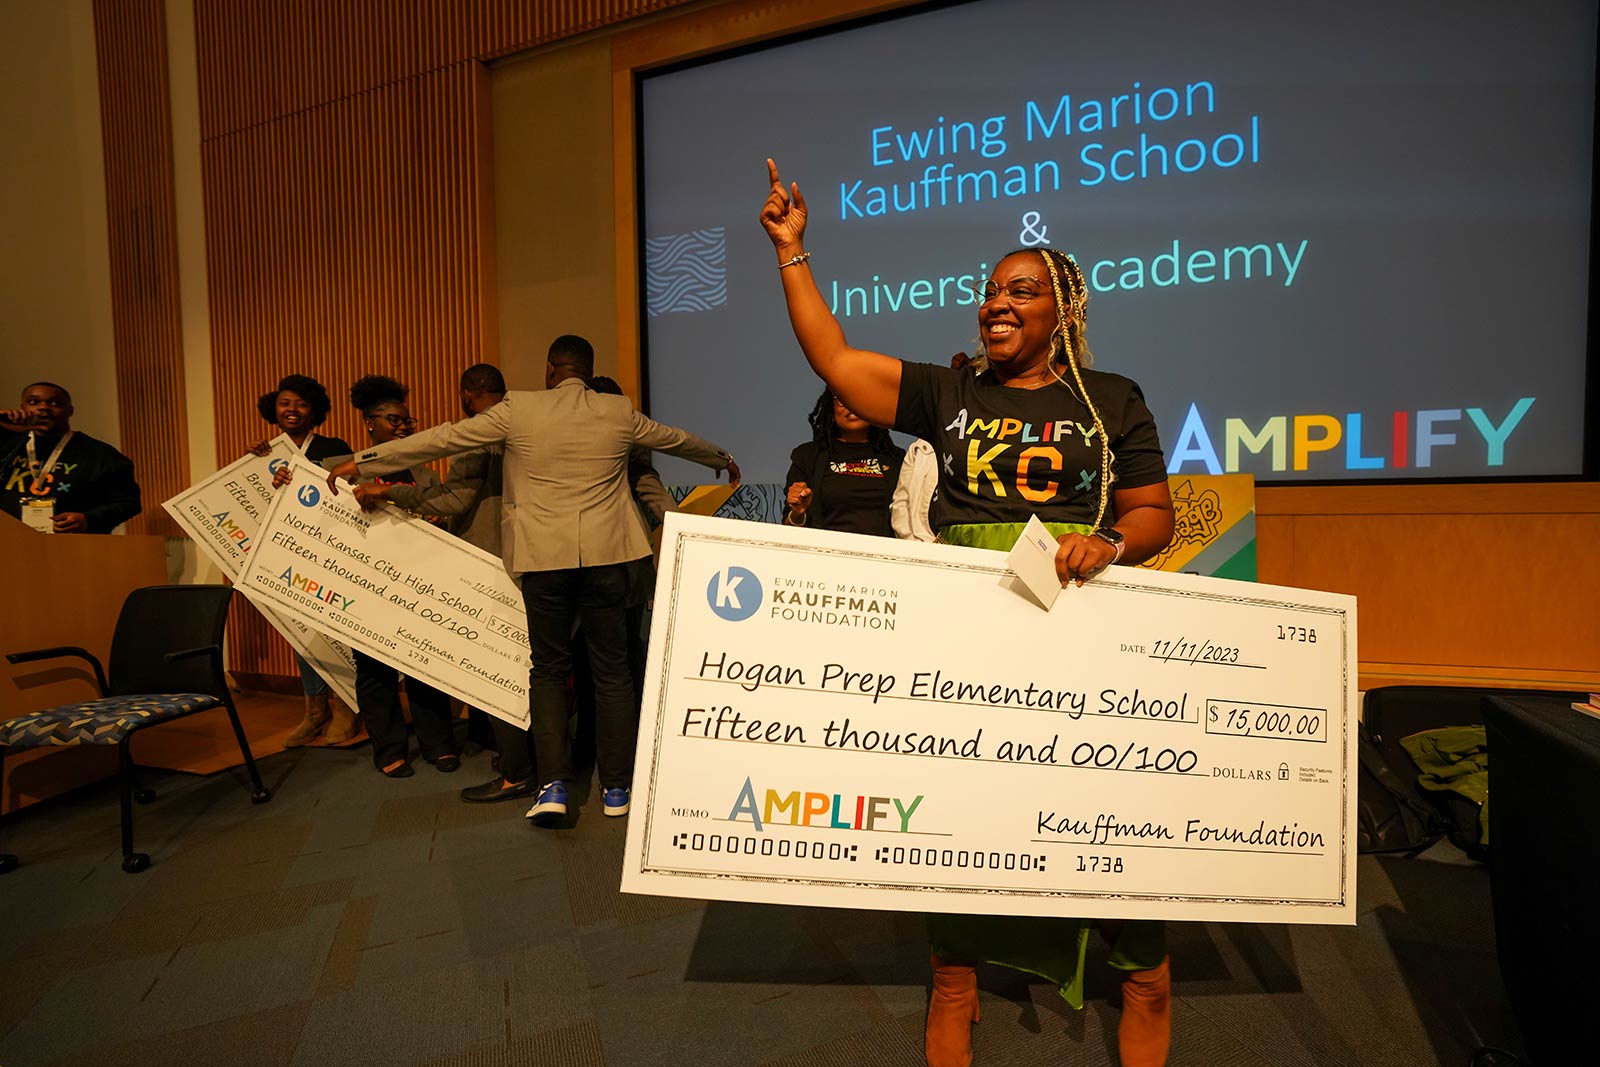 Amplify KC attendee and educator holds a life-sized check made out to Hogan Prep Elementary School for $15,000 from the Kauffman Foundation.